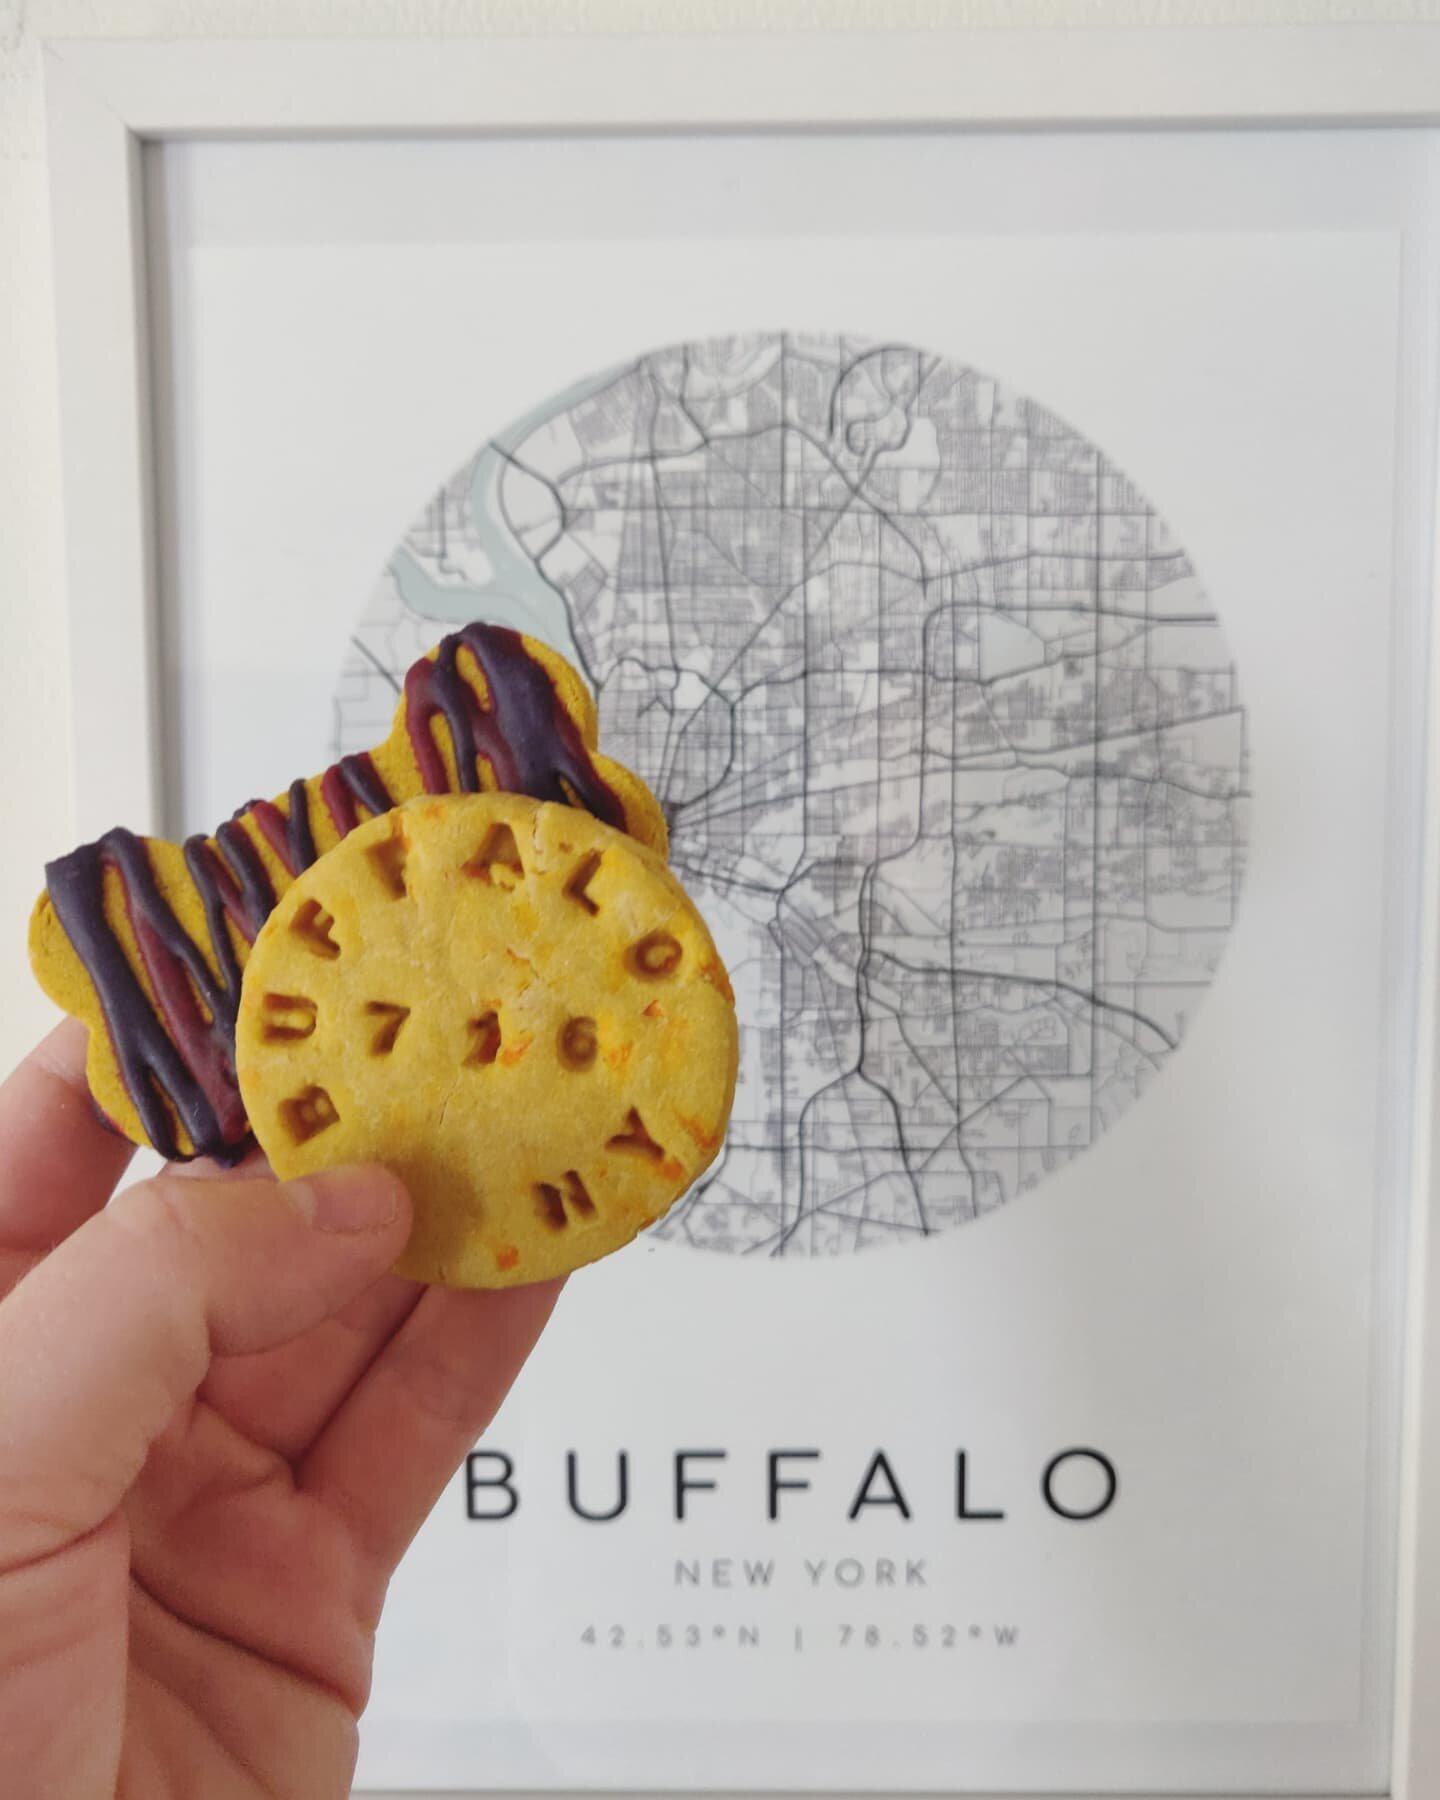 Happy 716 day Buffalo! This weekend we have some extra special Buffalo biscuits for you including a new chicken and carrot flavor! What's your favorite spot in WNY to take out of town friends?? &hearts;️💙

#buffalove #dogsofinstagram #dogsofbuffalo 